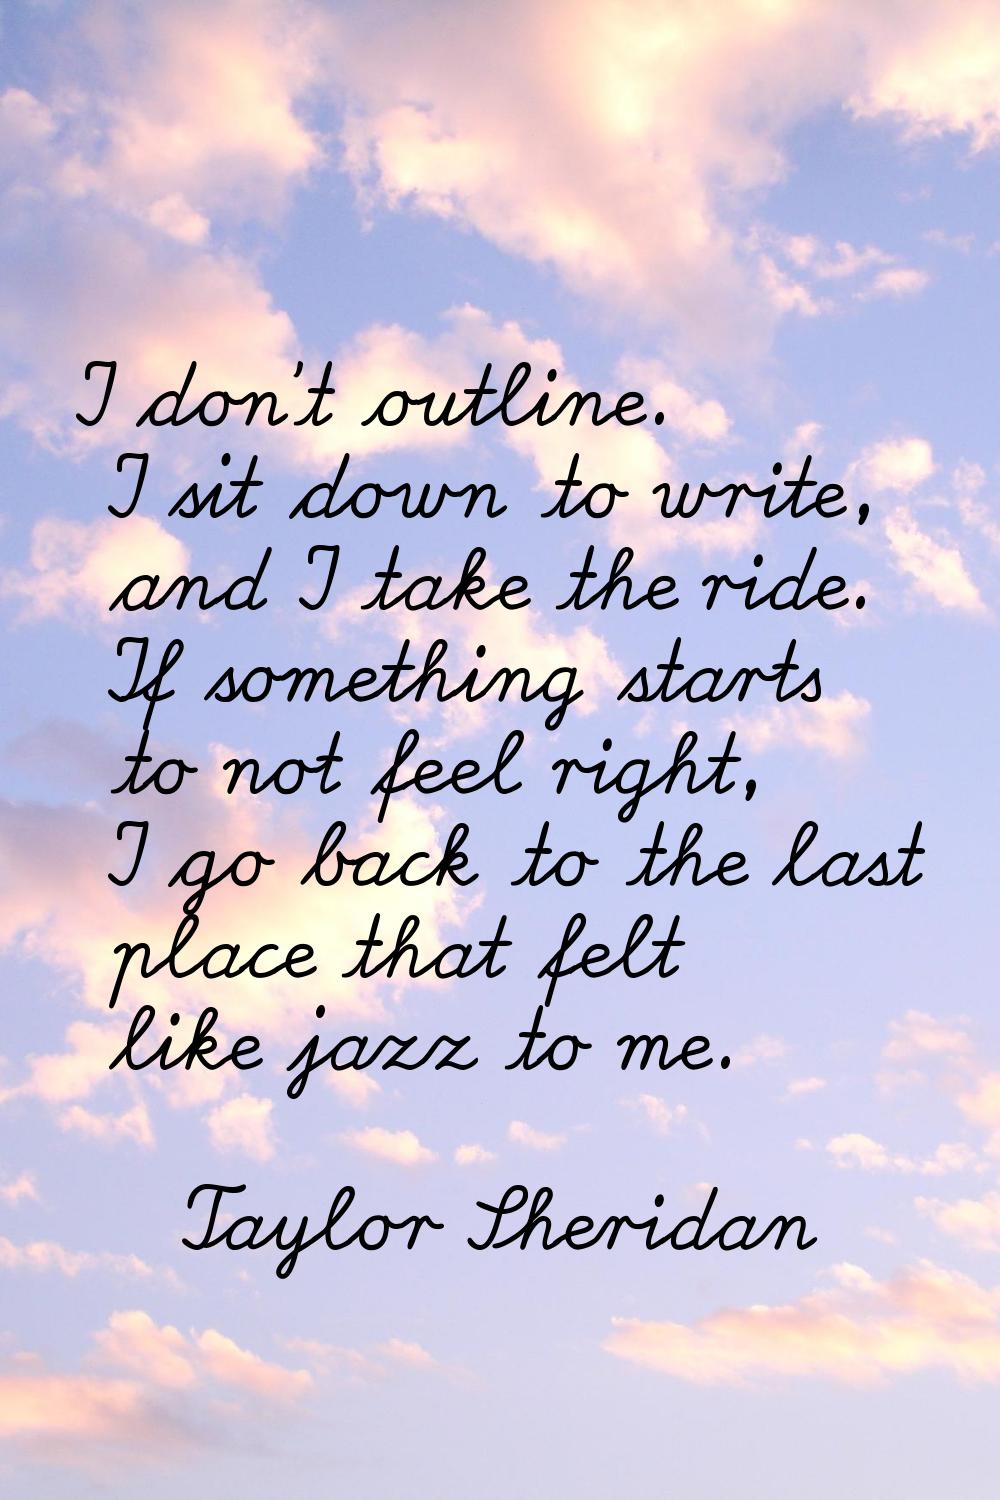 I don't outline. I sit down to write, and I take the ride. If something starts to not feel right, I